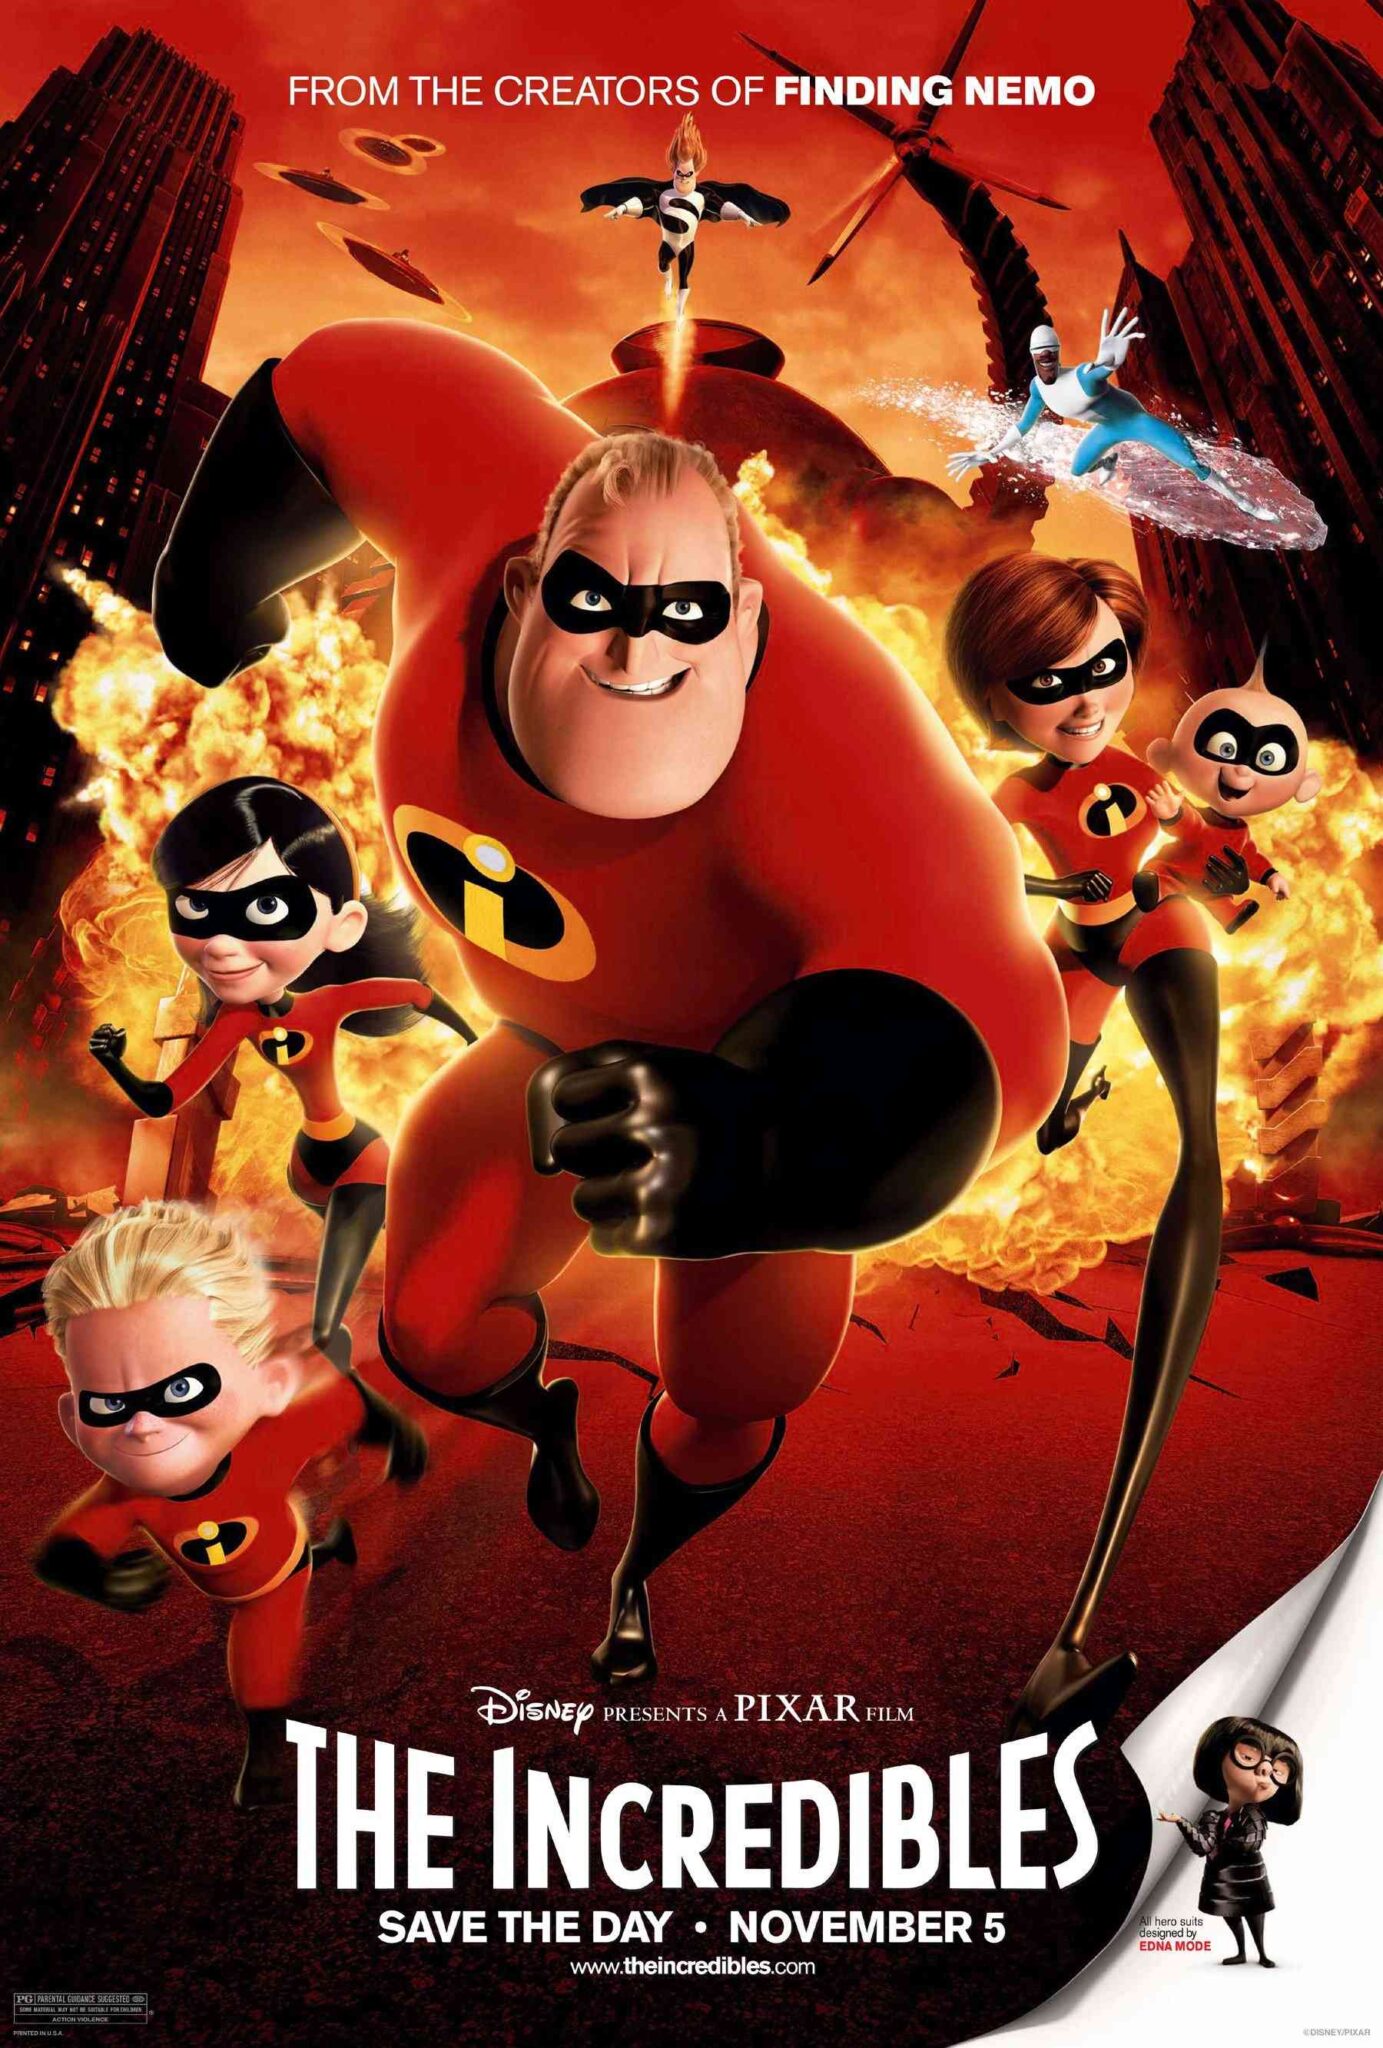 FULL MOVIE: The Incredibles (2004)